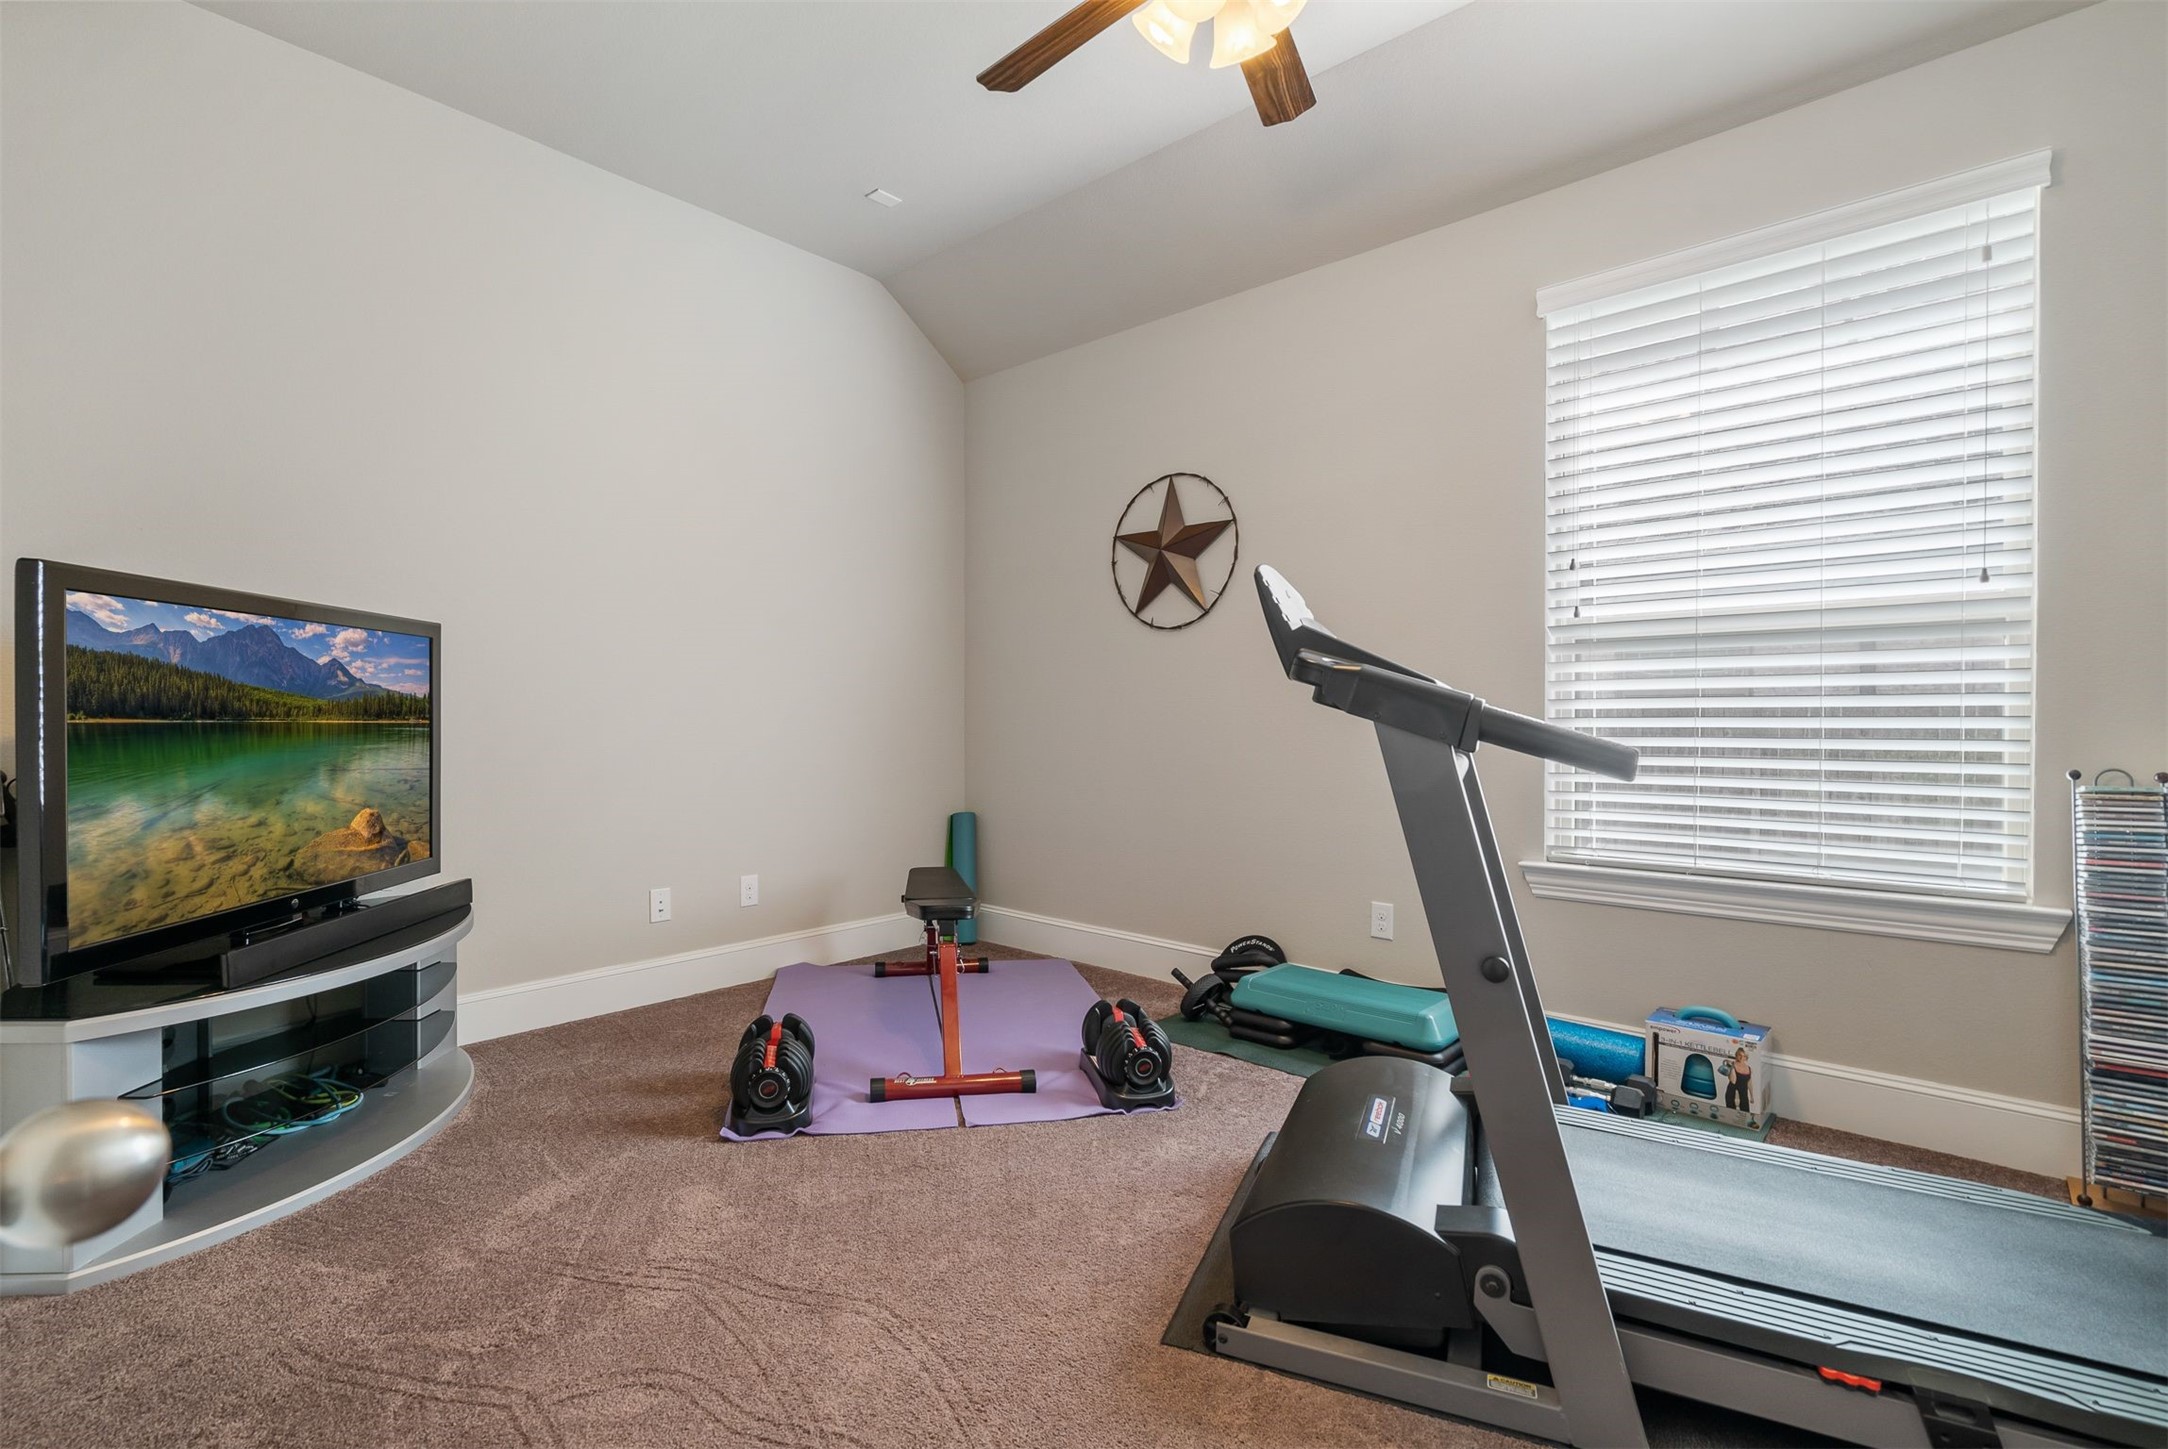 Flex room: workout, second office, media room or craft room!  Possibilities are endless!